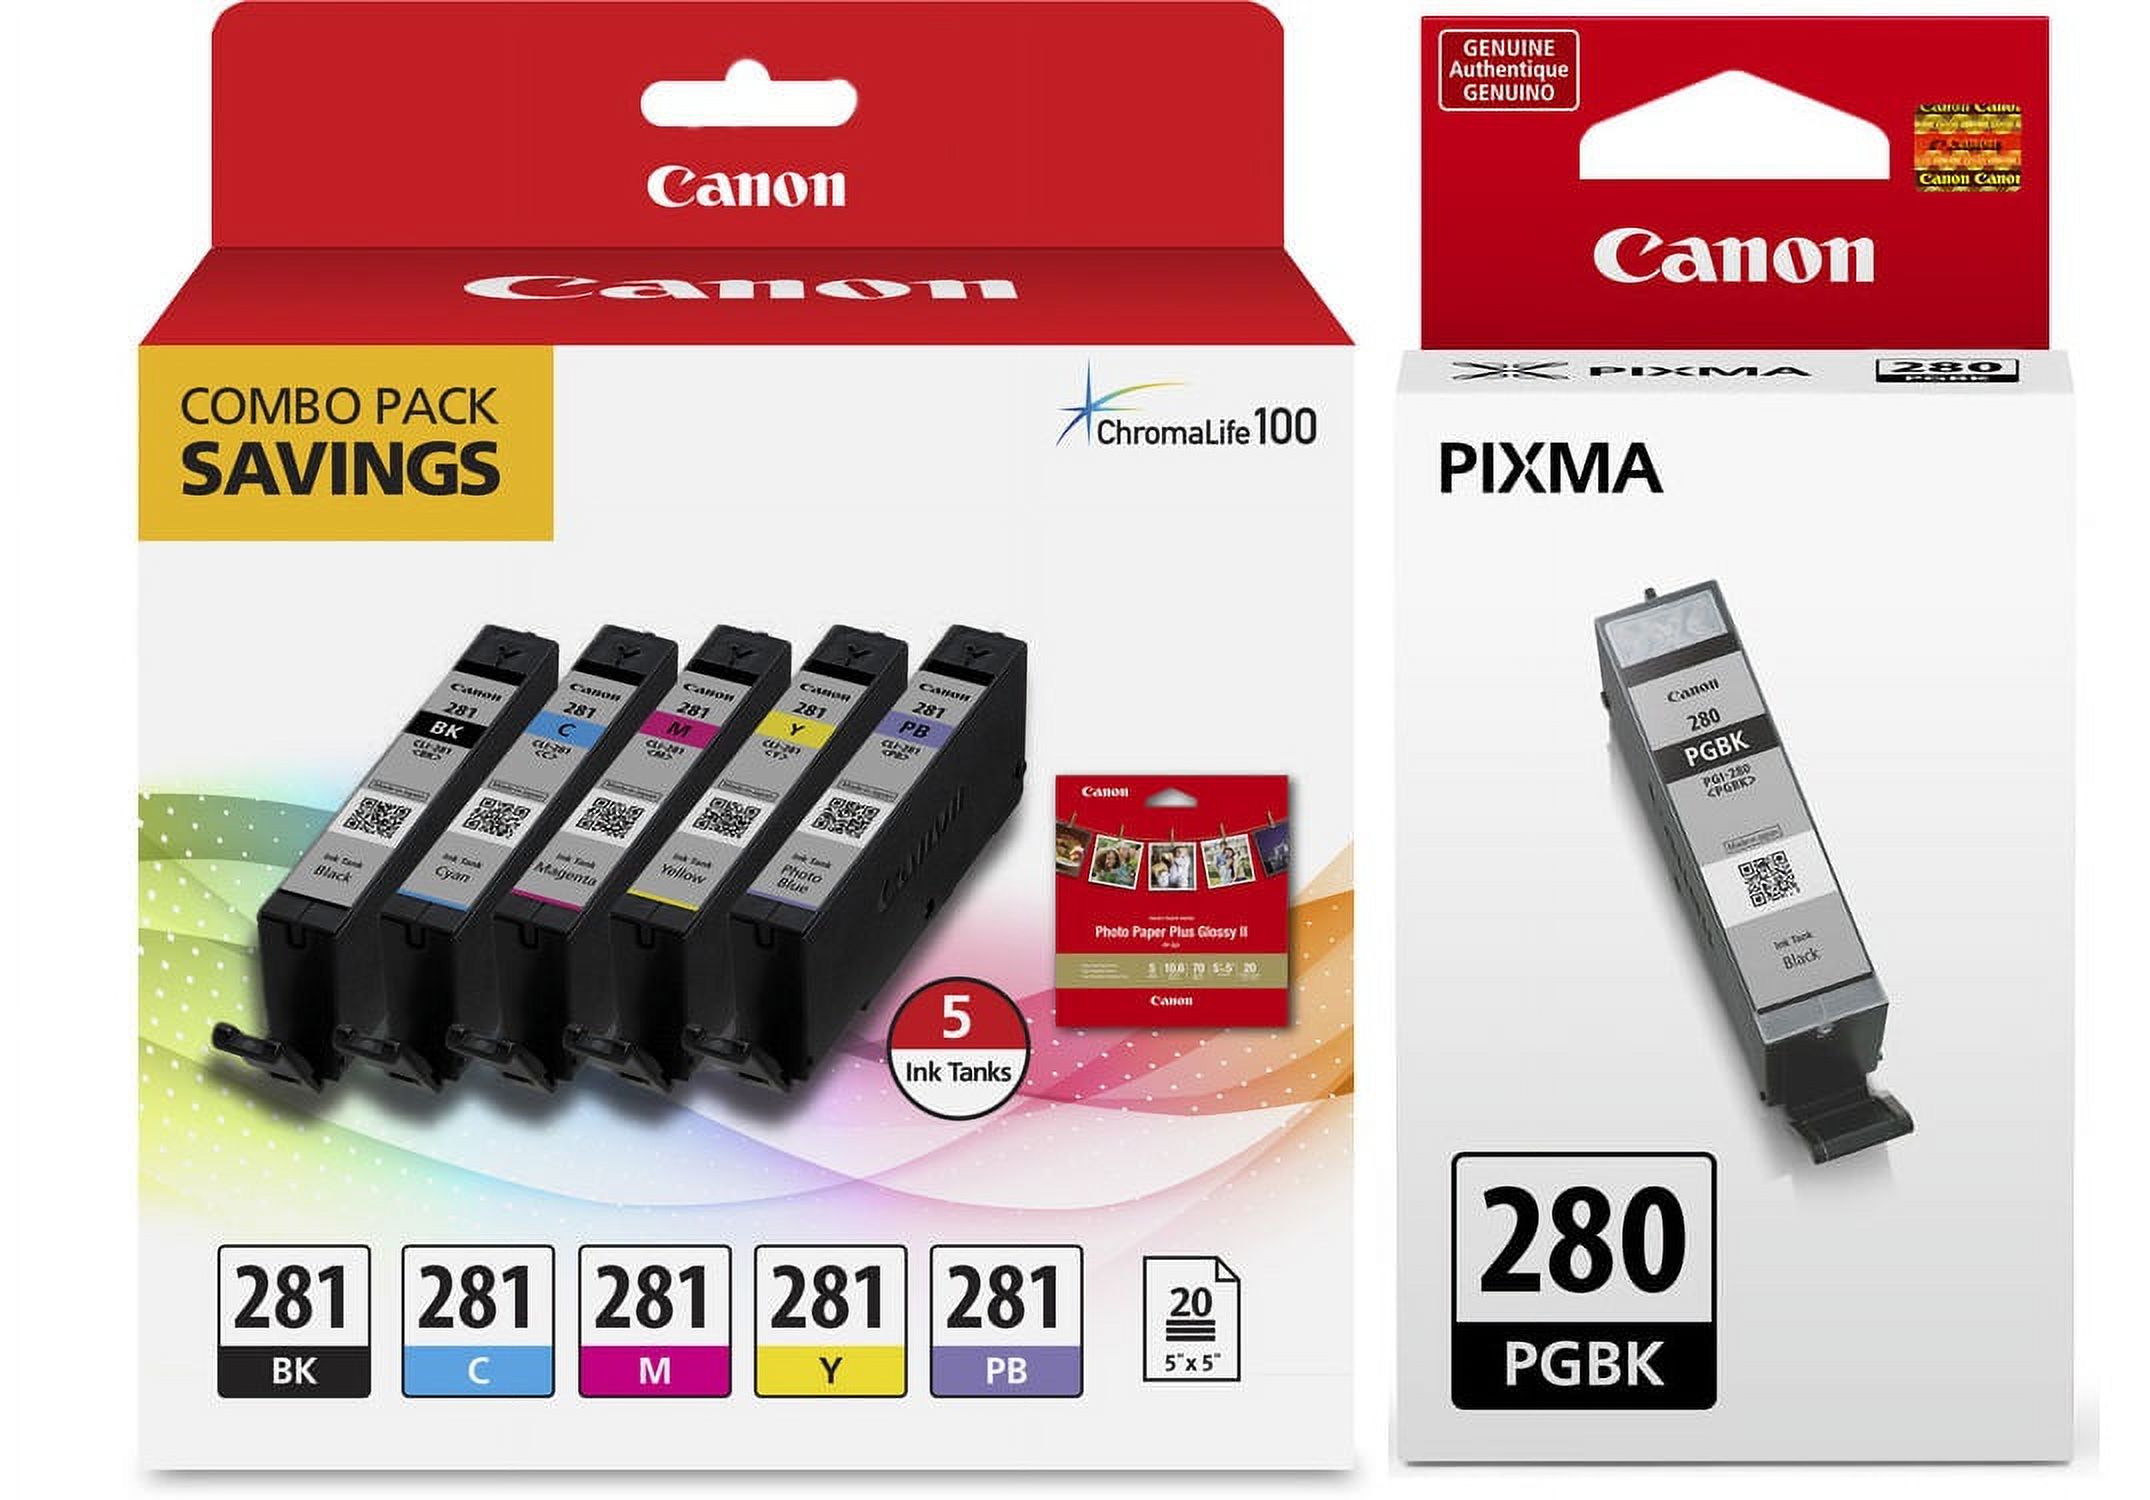 Genuine Canon CLI-281 5-Color Ink Tank Combo Pack with 5 x 5 Photo Paper (2091C006) + Canon PGI-280 Pigment Black Ink Tank (2075C001) - image 1 of 3